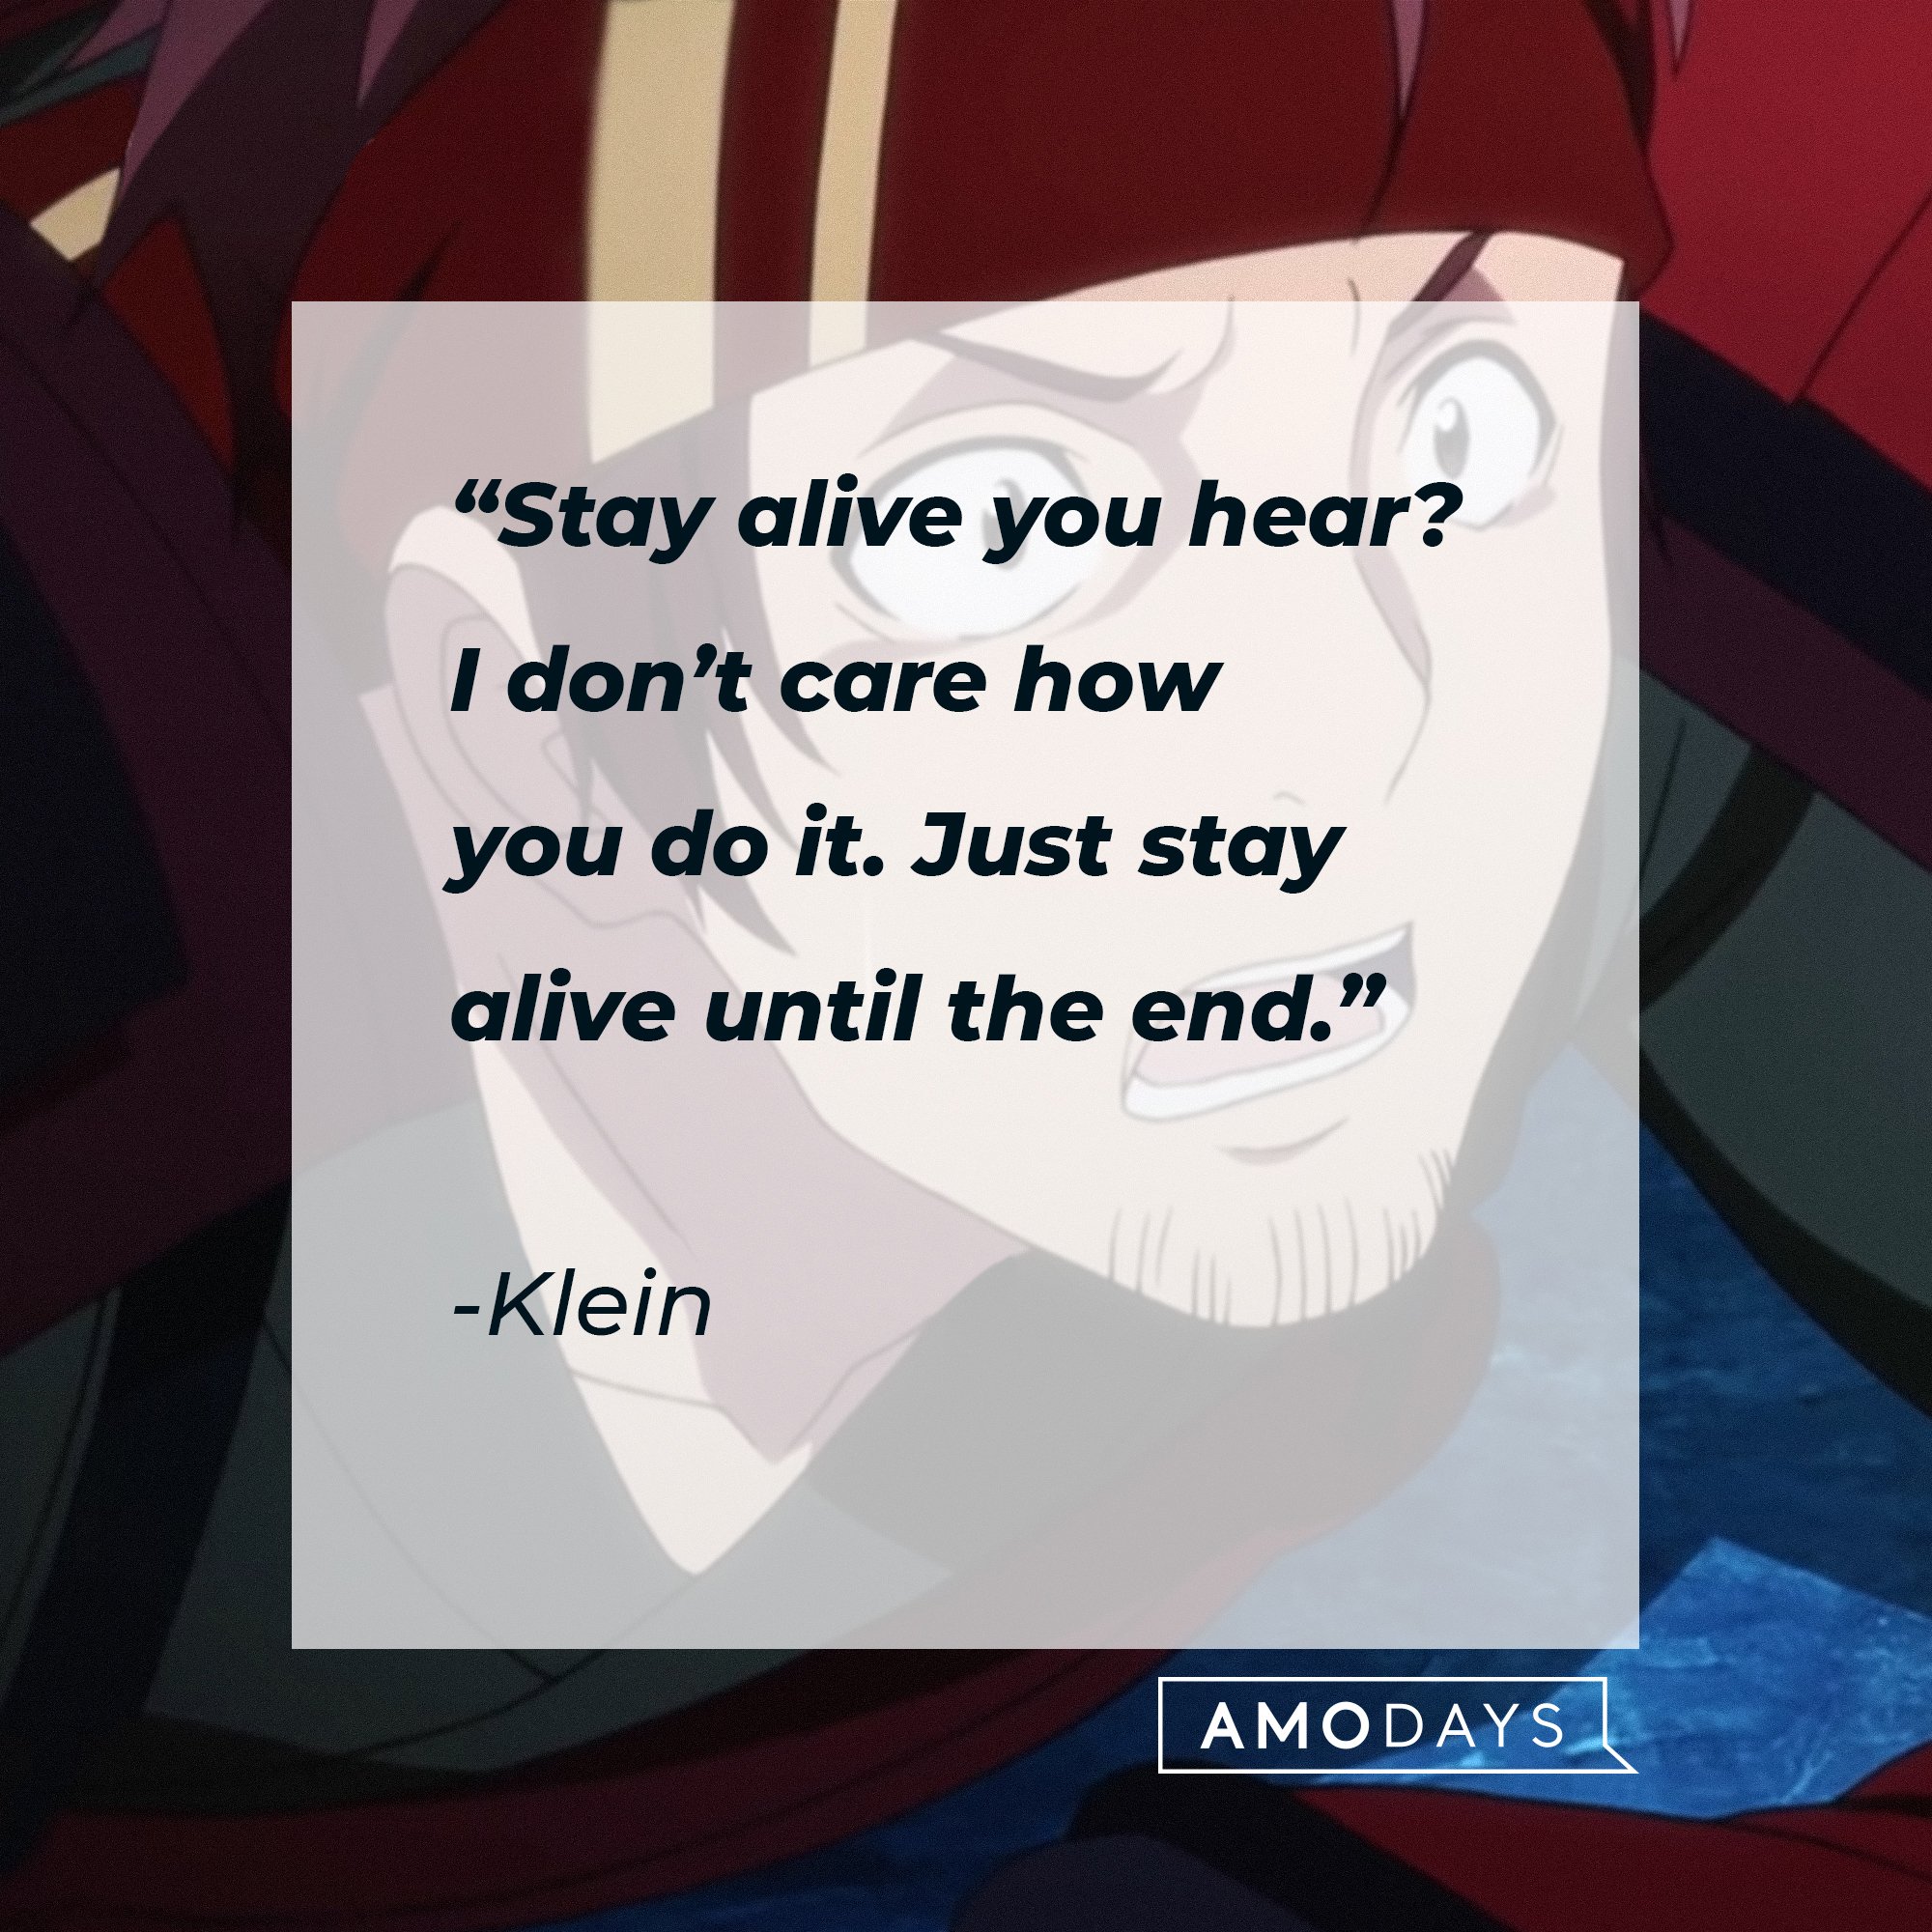 Klein’s quote: “Stay alive you hear? I don’t care how you do it. Just stay alive until the end.” | Image: AmoDays